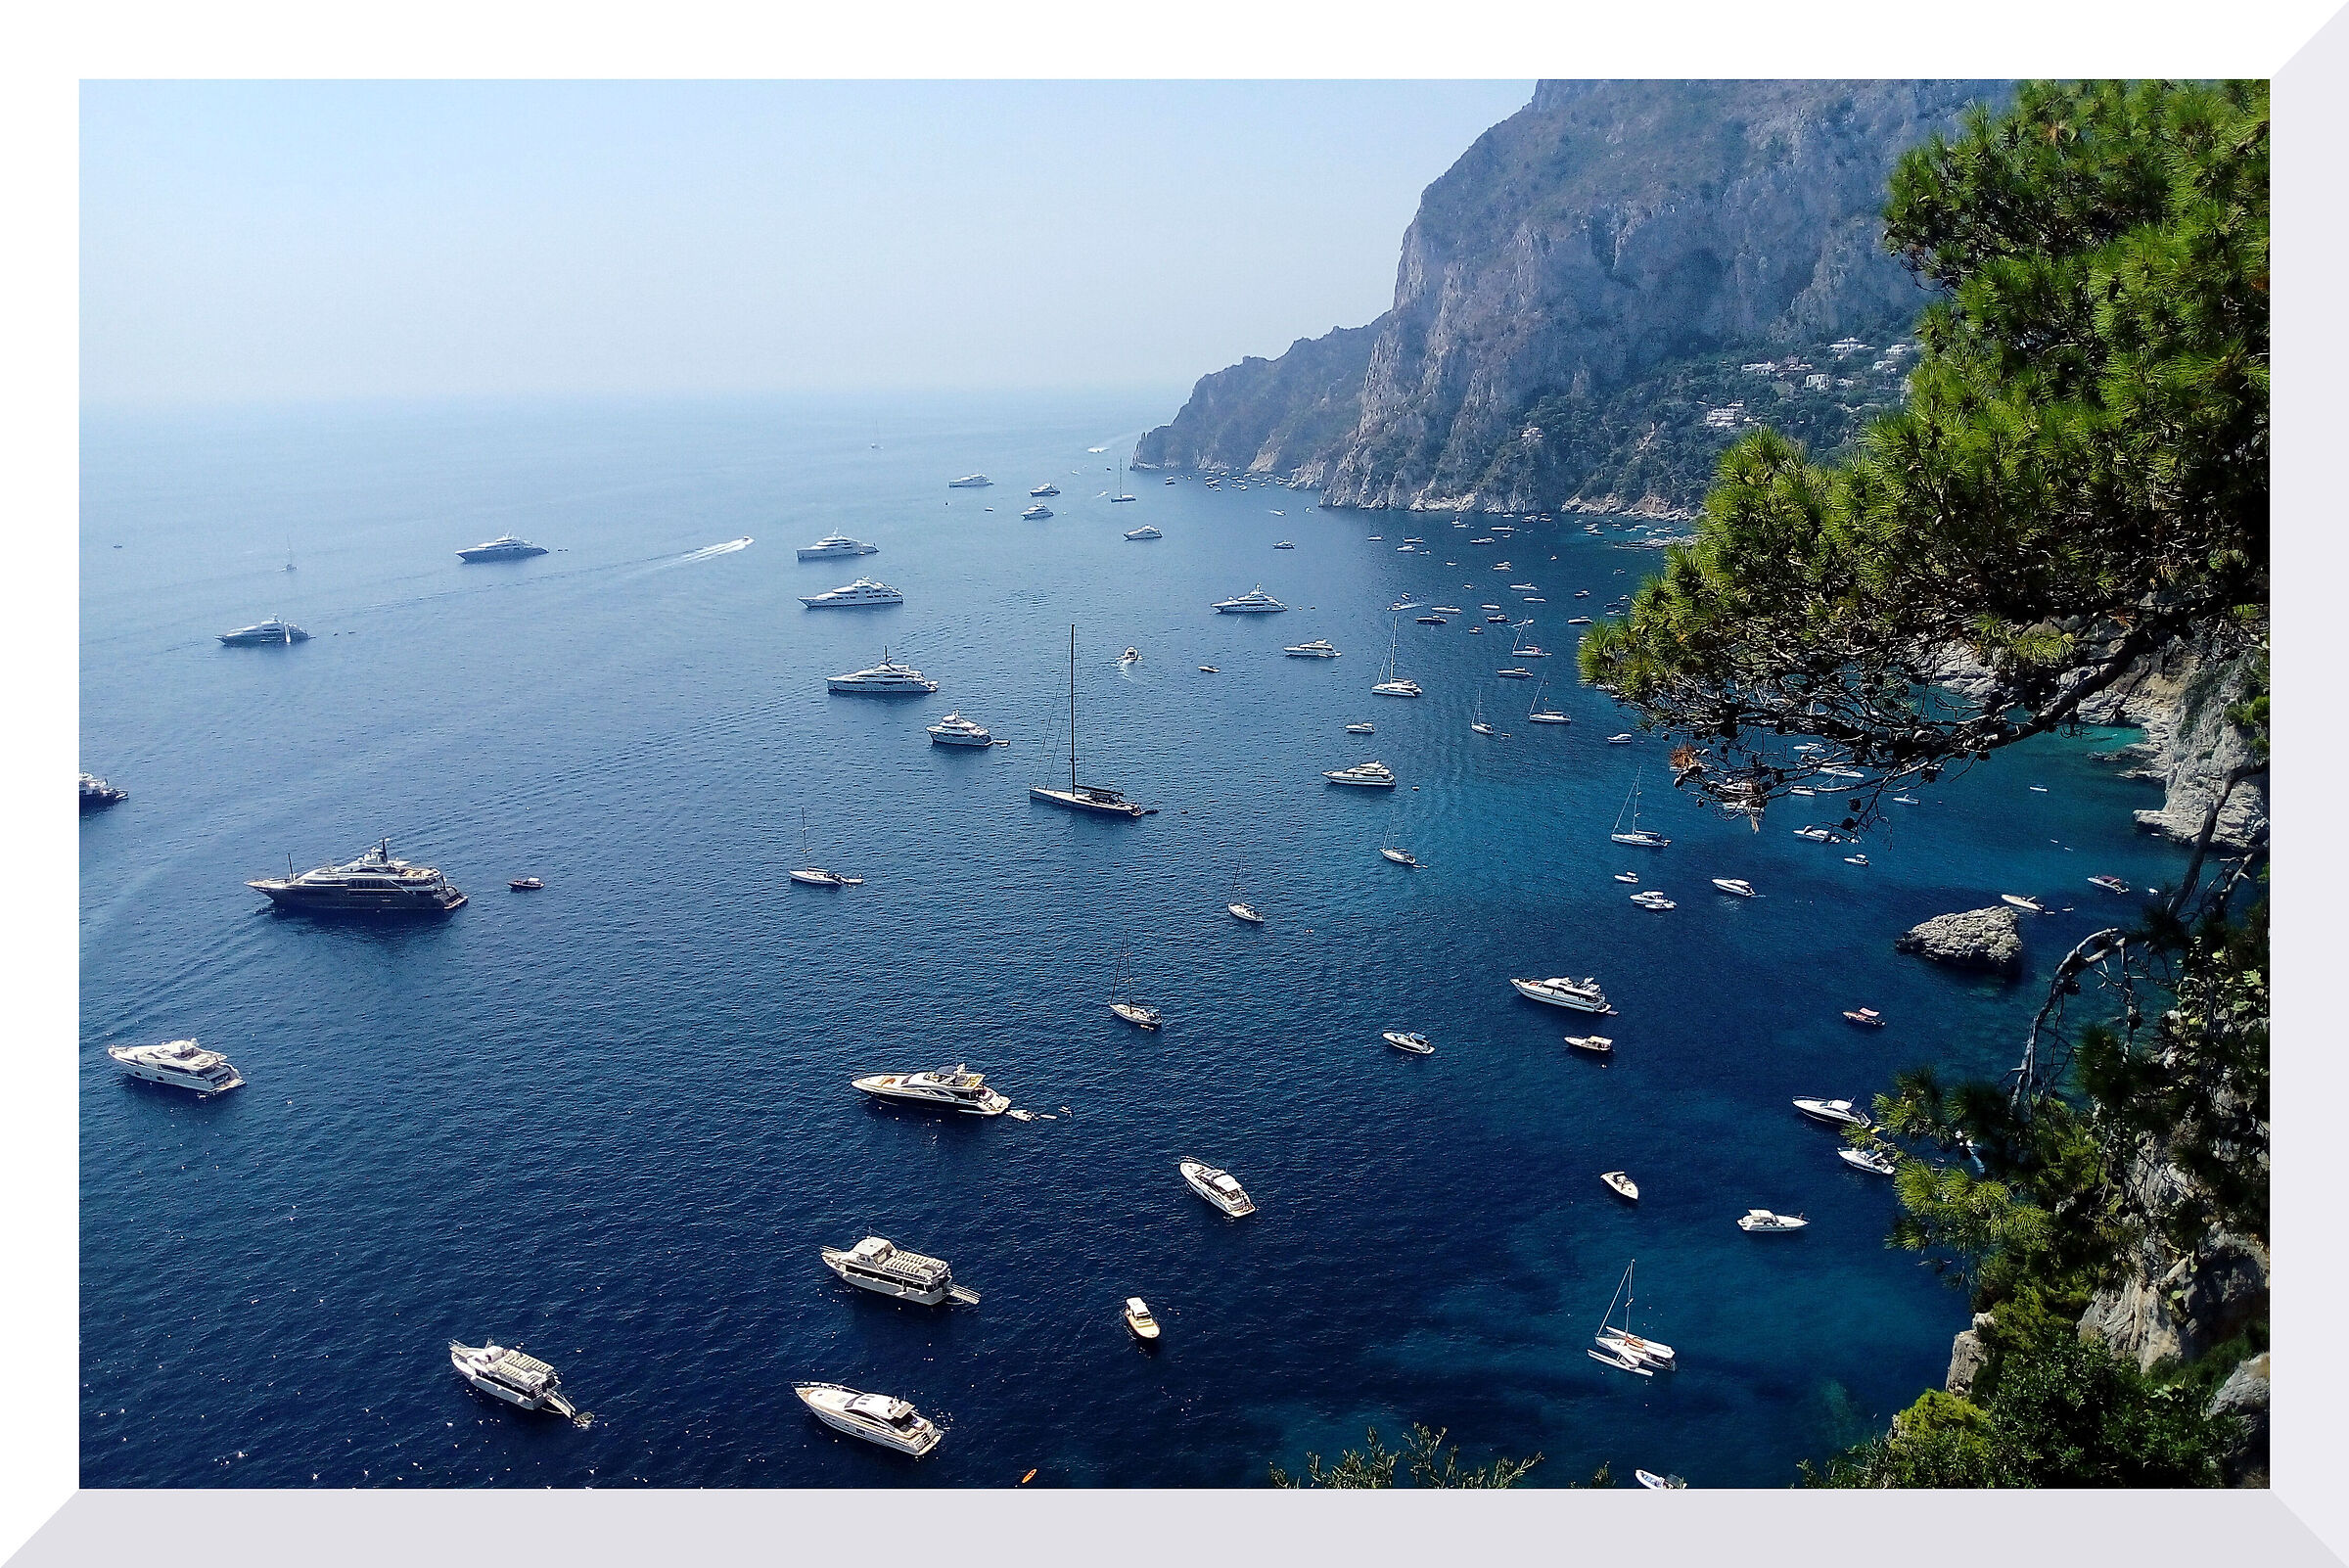 Capri... once upon a time...